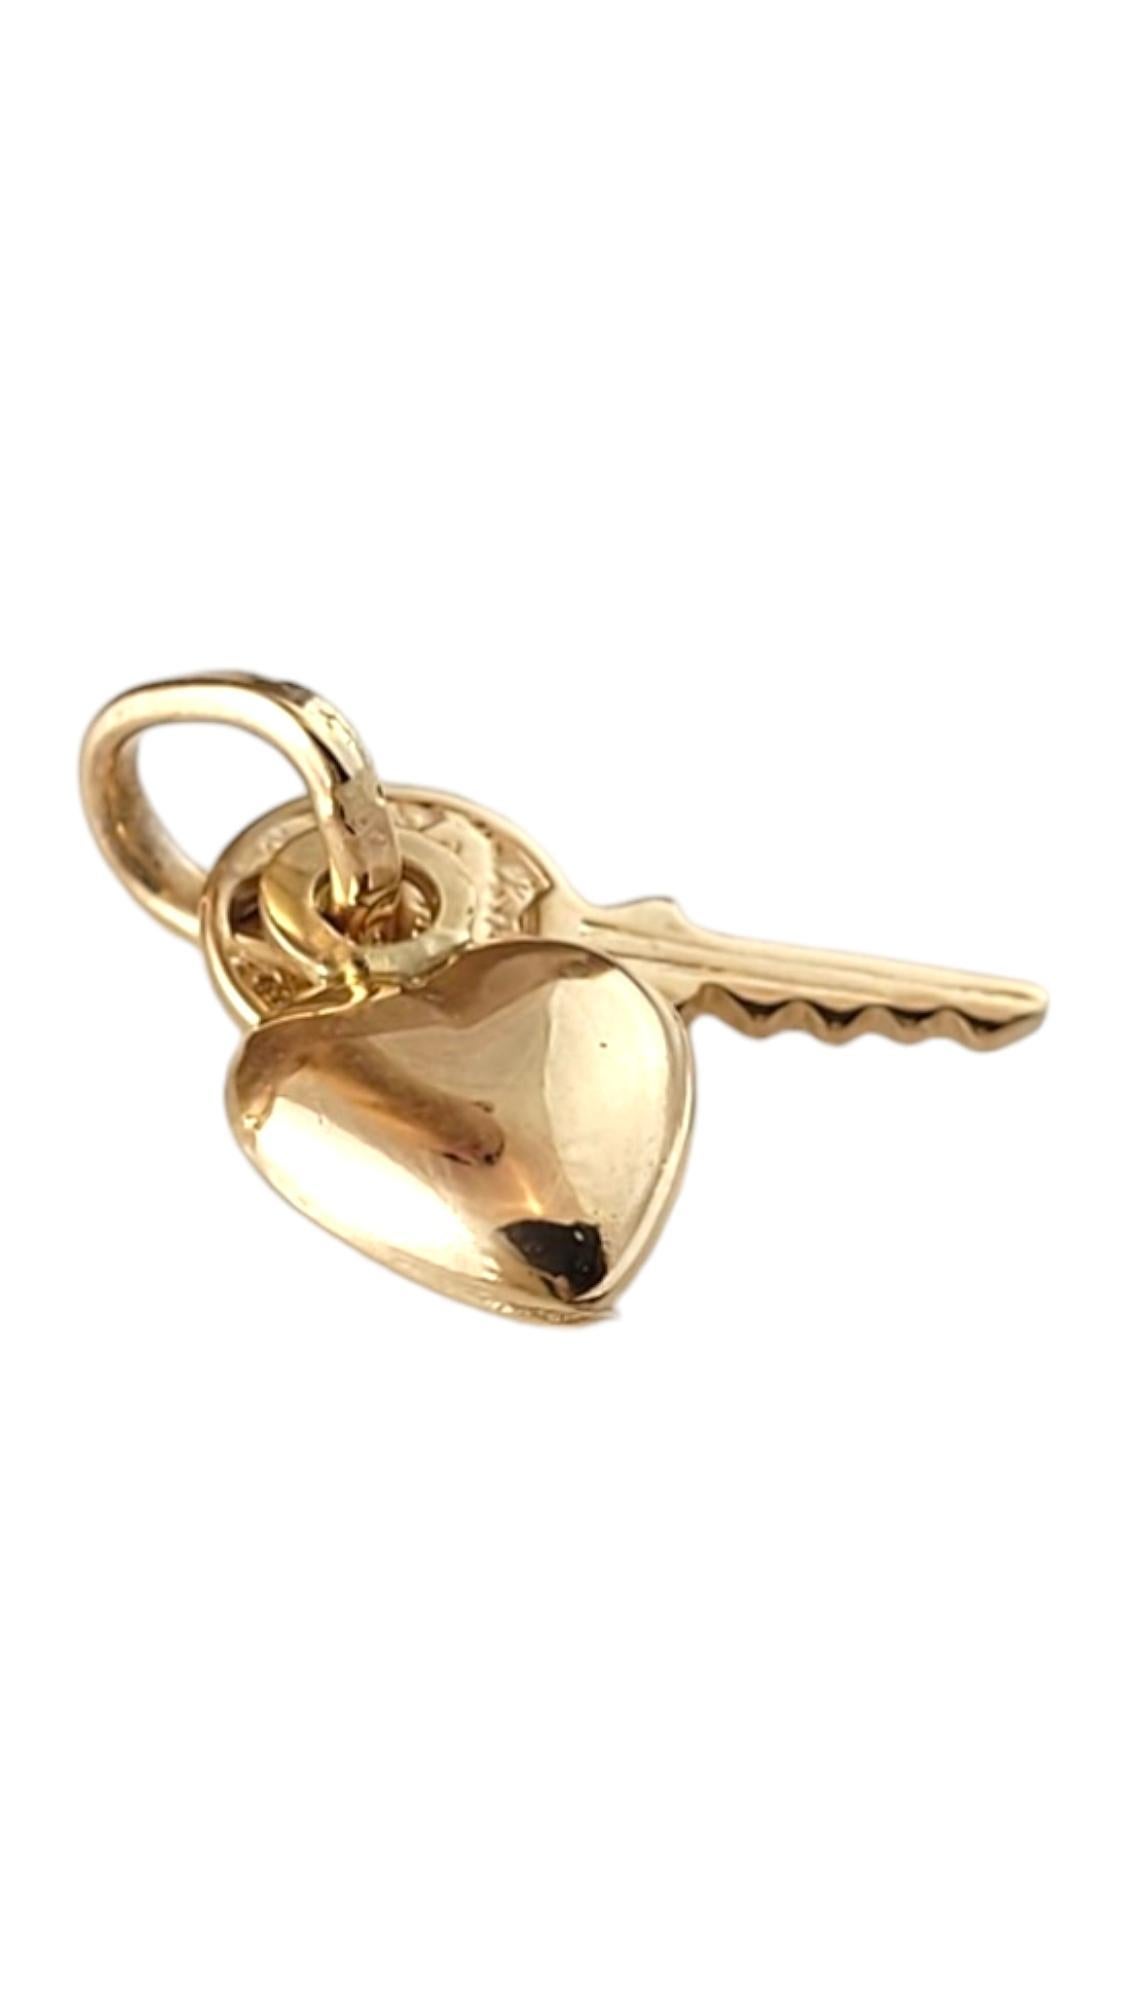 18K yellow Gold Heart & Key Charm #16880

This adorable 18K gold charm features a beautiful dangling heart and key!

Size: 18.6mm X 7.9mm X 3.7mm

Weight: 0.8 dwt/ 1.2 g

Hallmark: 750

Very good condition, professionally polished.

Will come